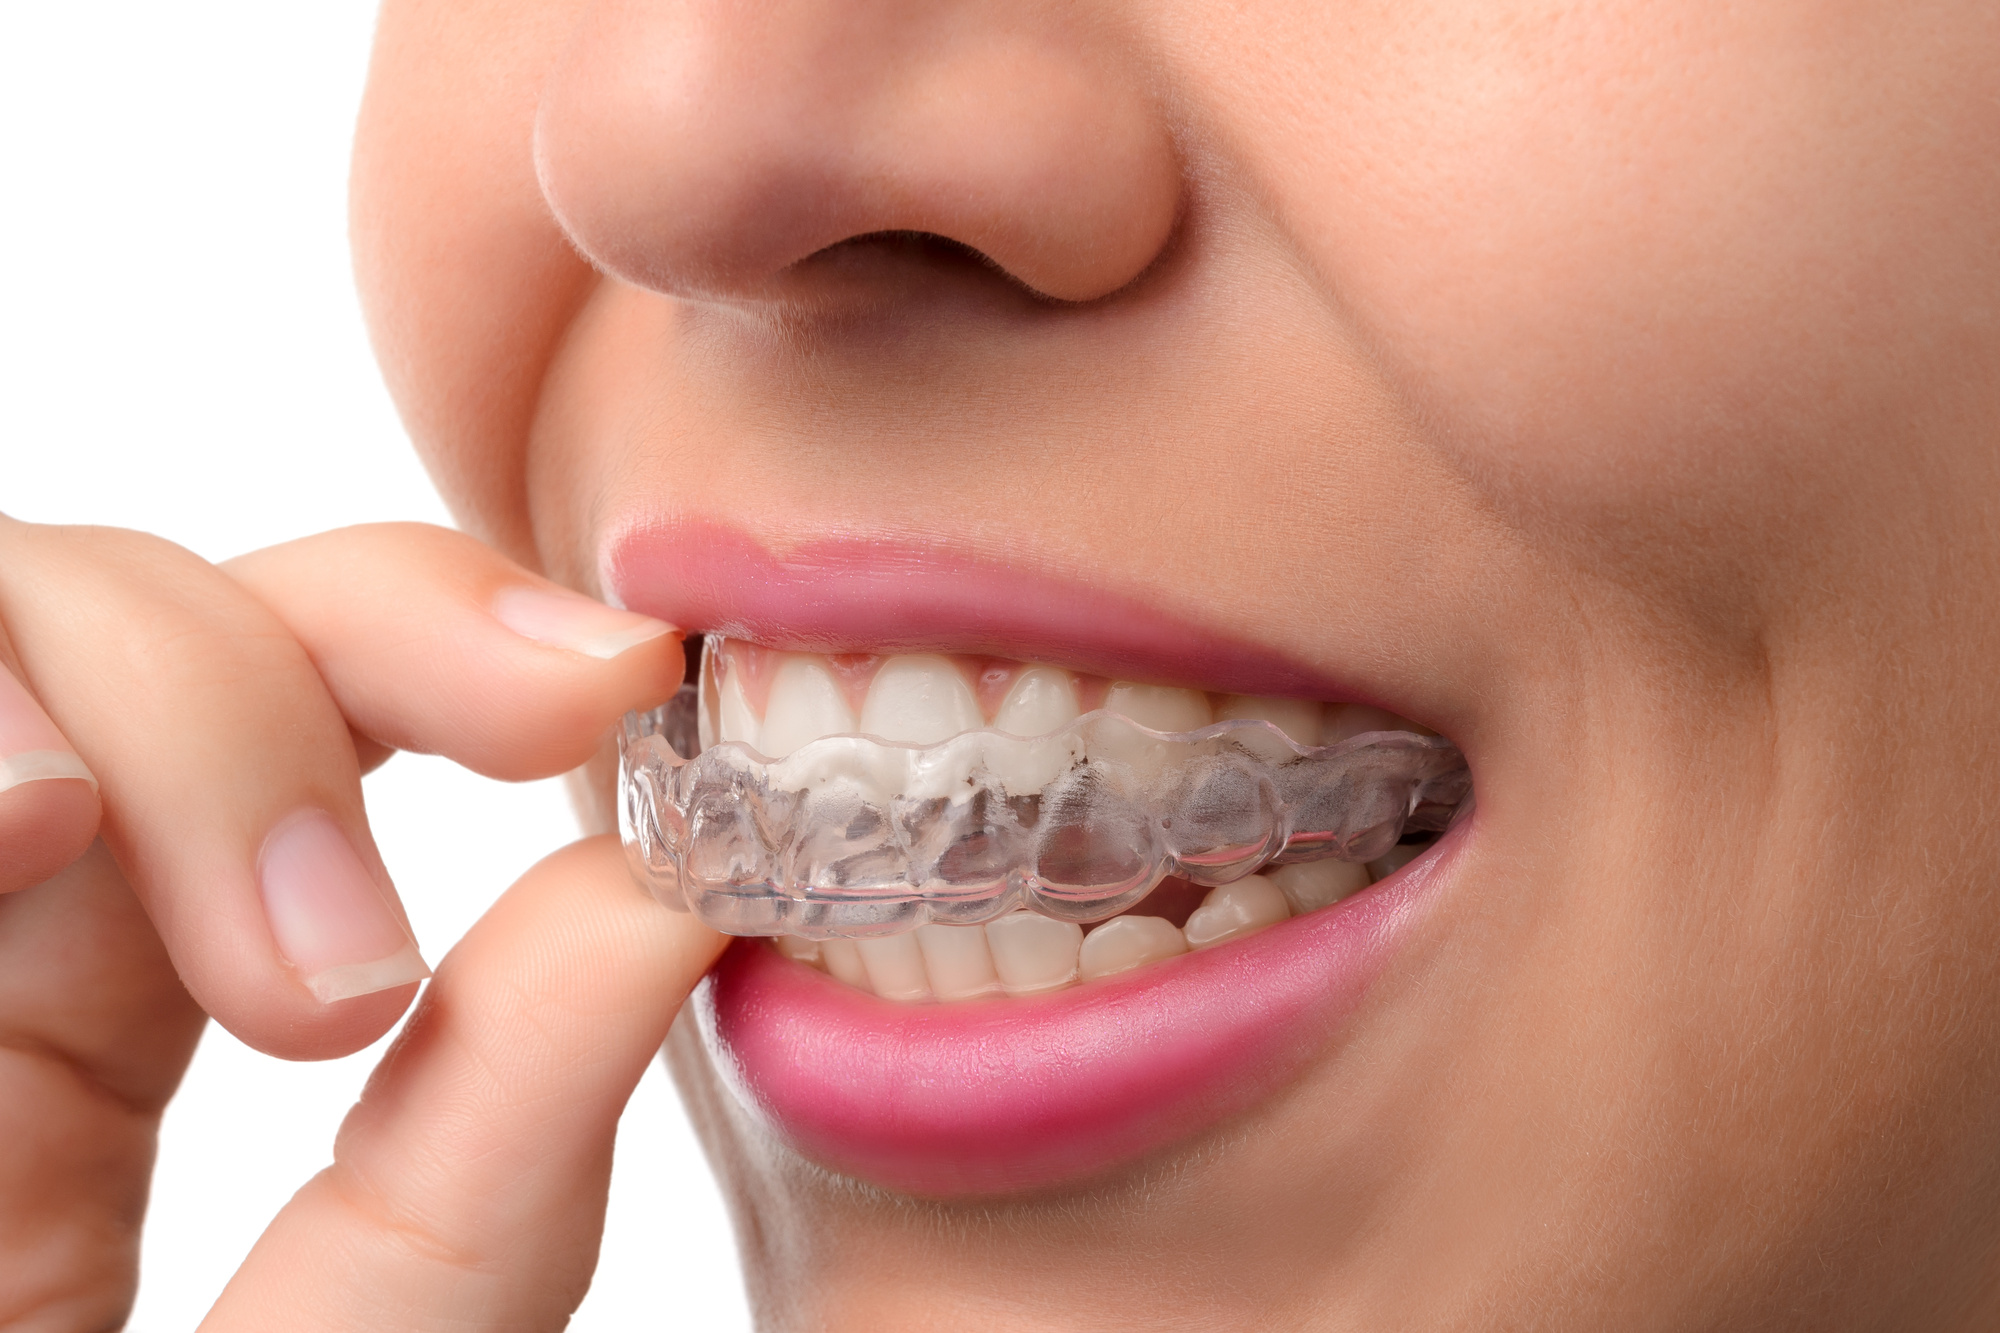 Before you get Invisalign, you should know the prices you can expect to pay. This guide covers the average cost of Invisalign.